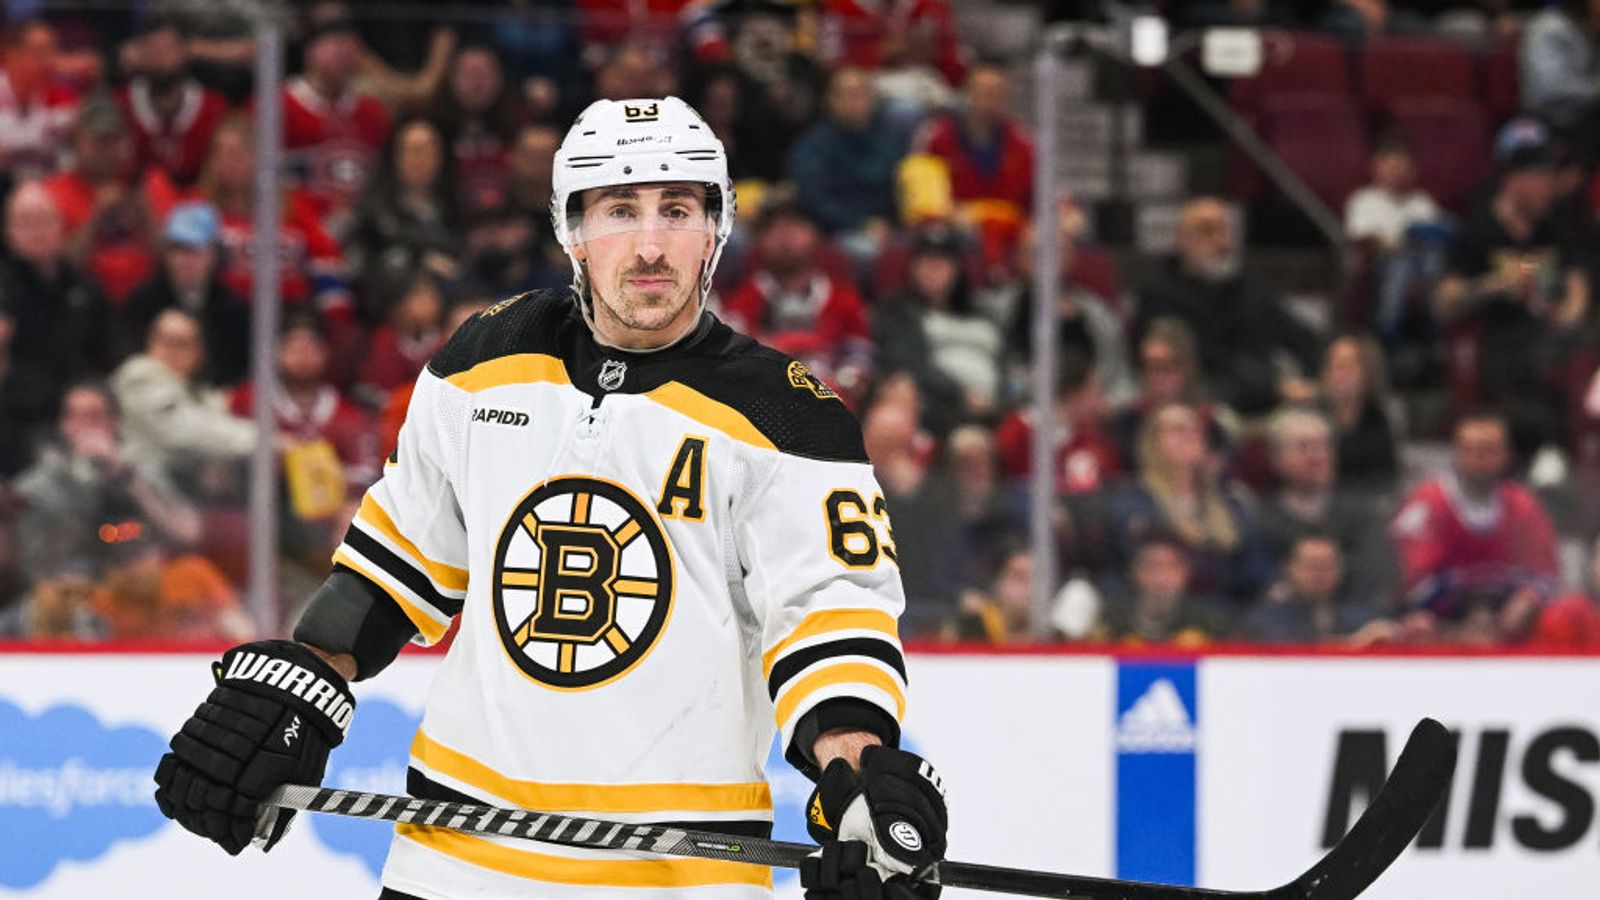 Marchand: Captaincy 'Means More Than Anyone Will Ever Know